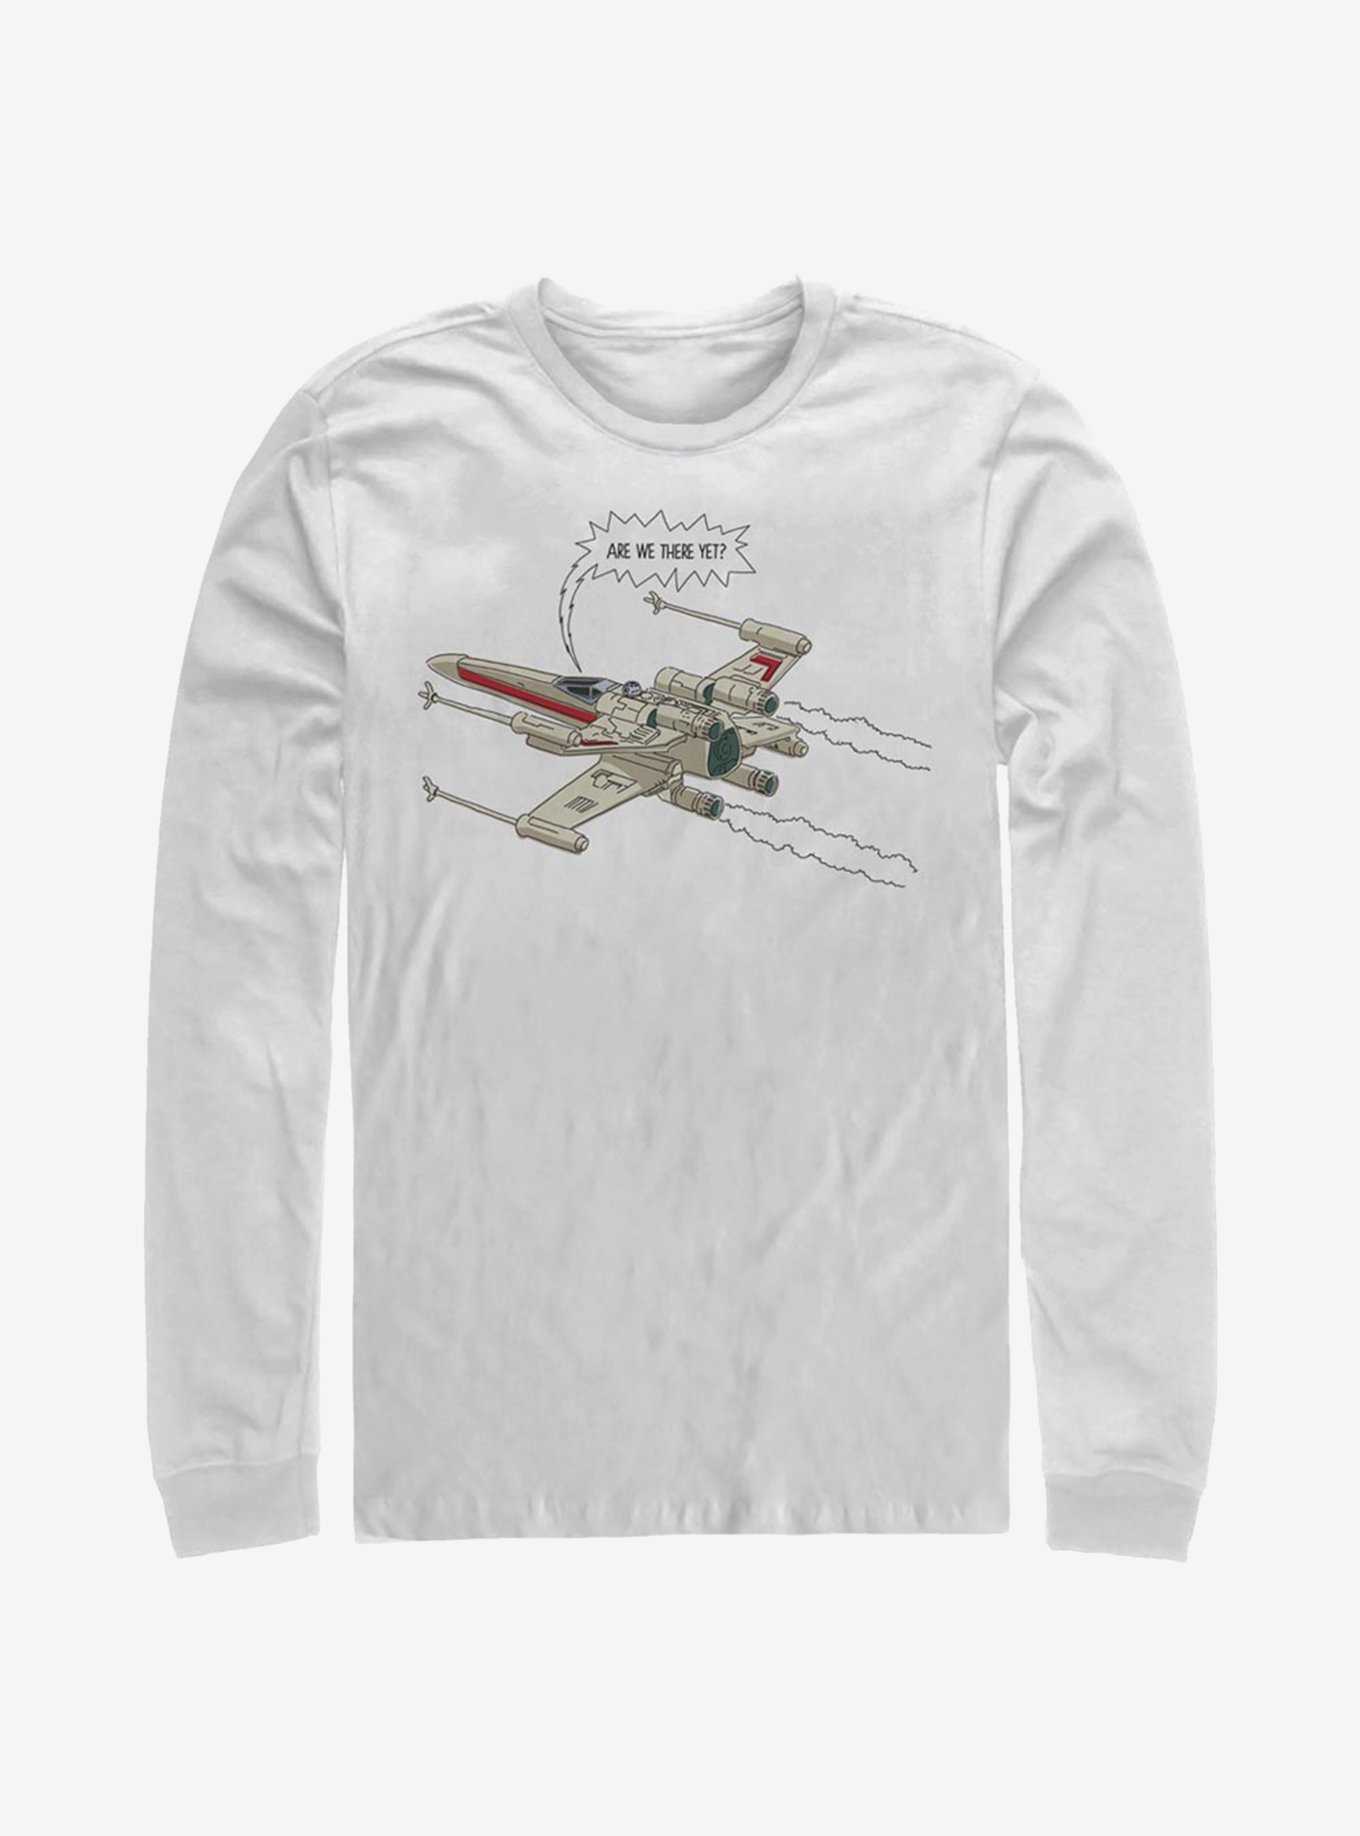 Star Wars Are We There Yet Long-Sleeve T-Shirt, , hi-res